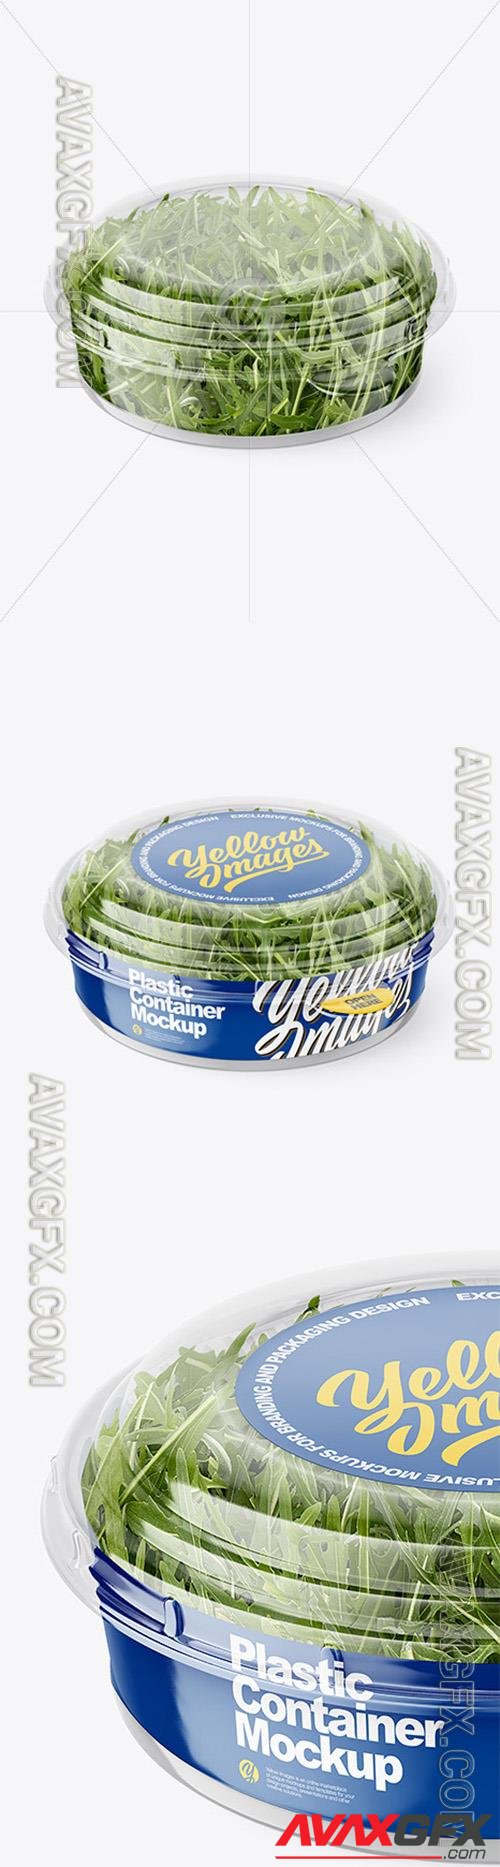 Clear Plastic Container with Arugula Salad Mockup 89170 TIF